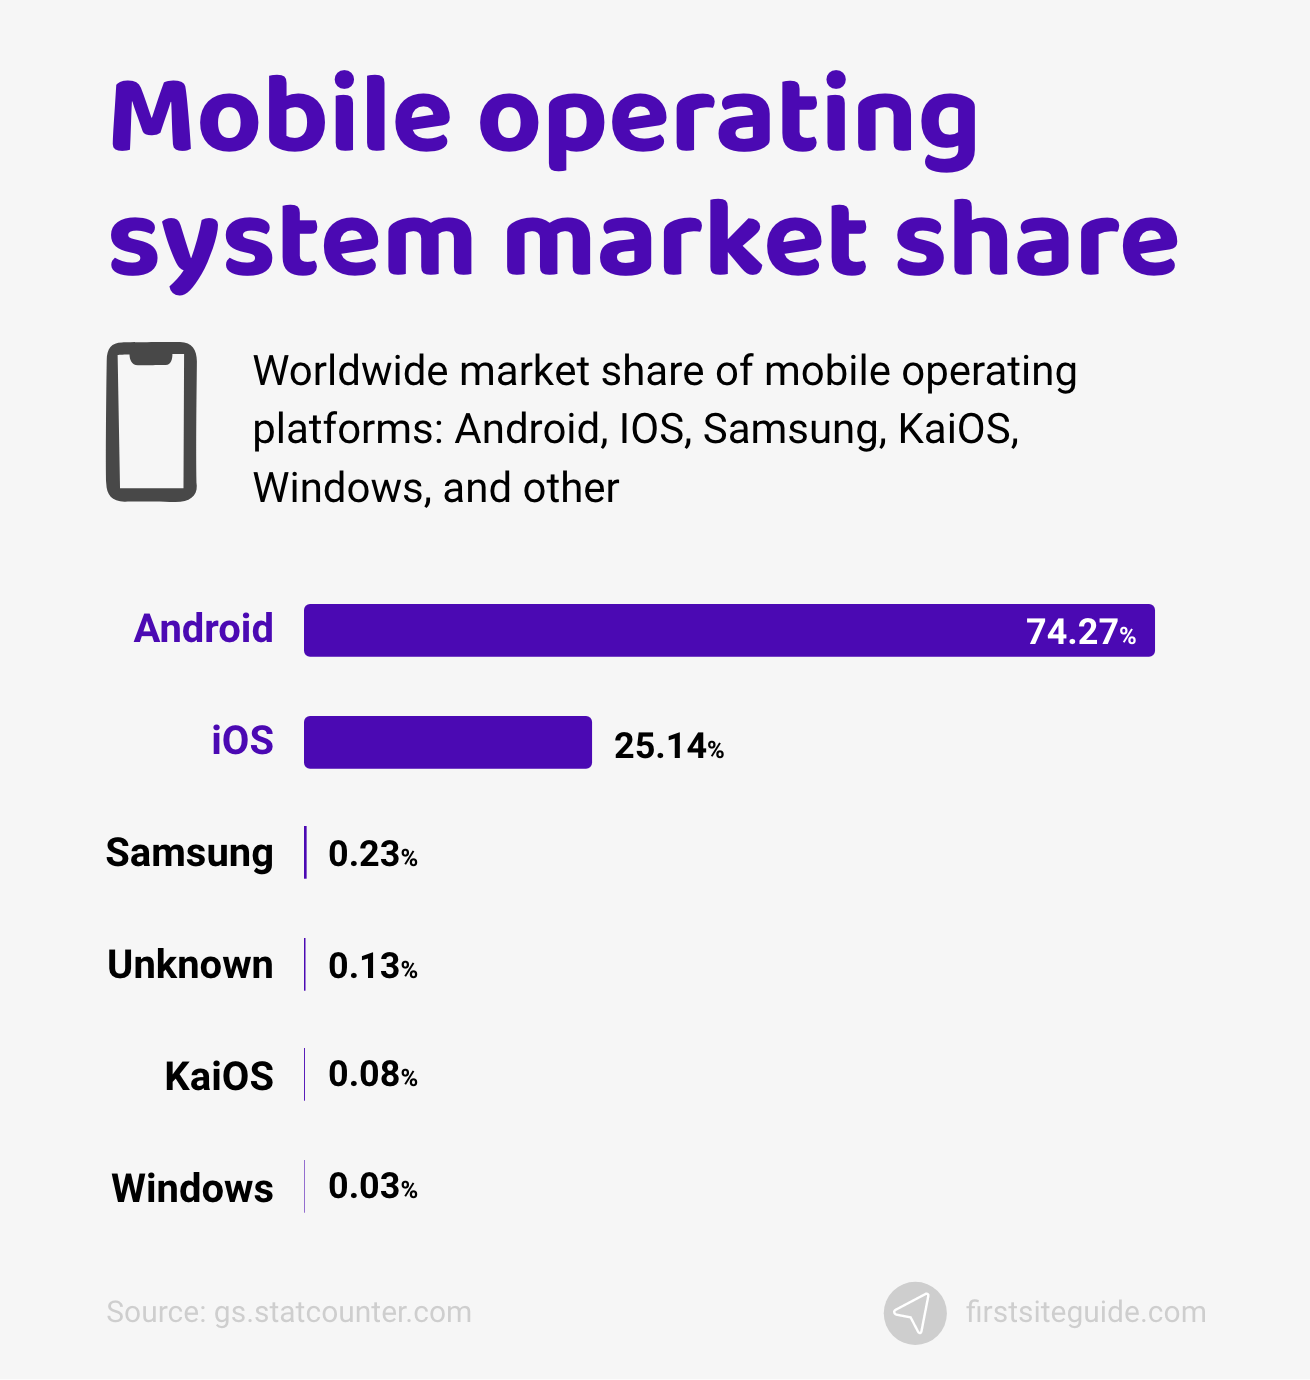 Mobile operating system market share